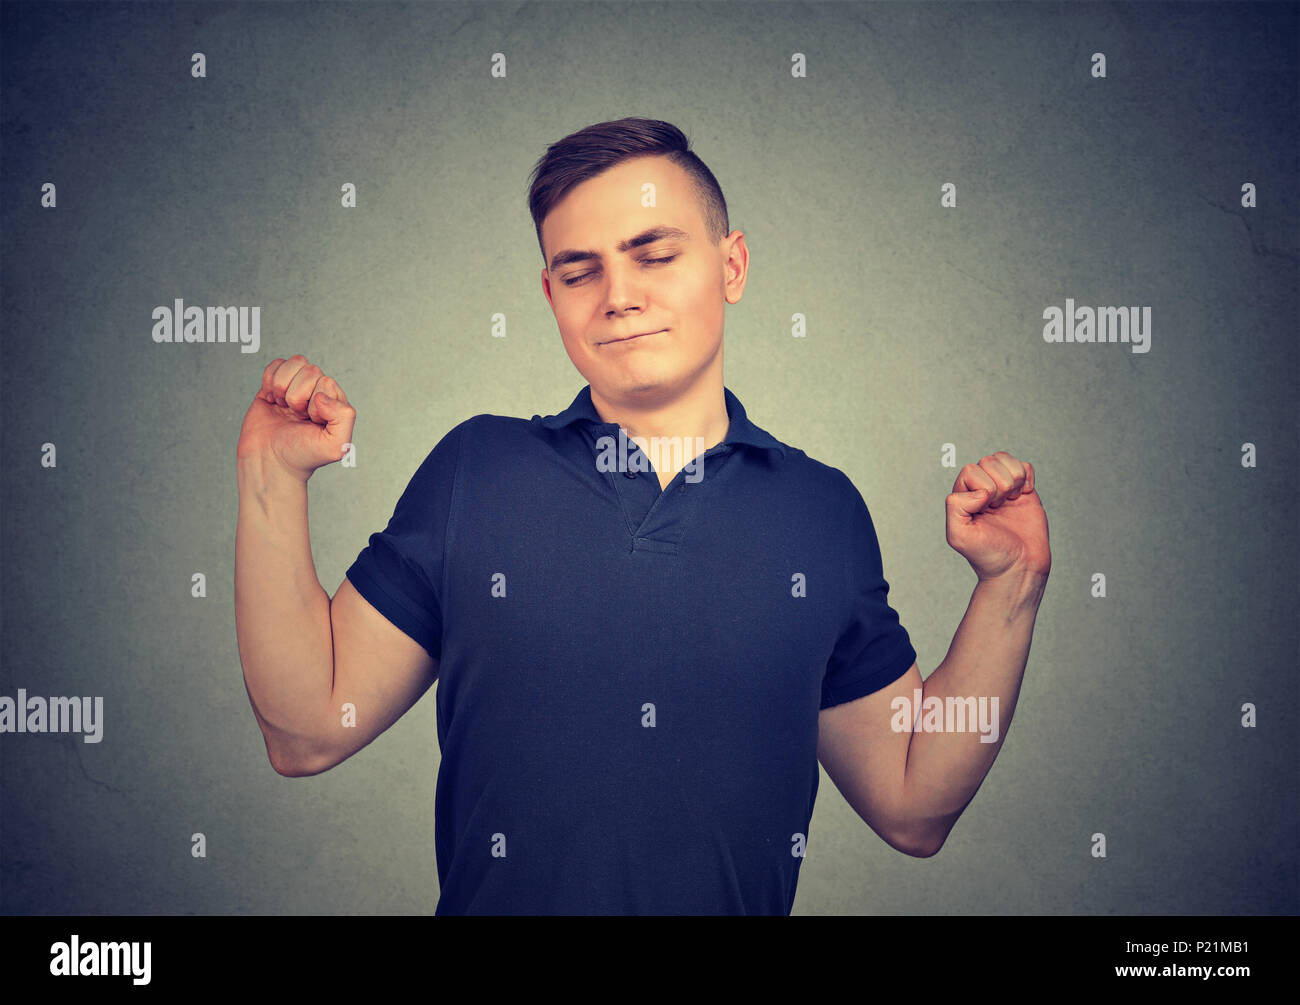 Sleepy man stretching arms back isolated on gray wall background. Sleep deprivation, burnout, concept Stock Photo